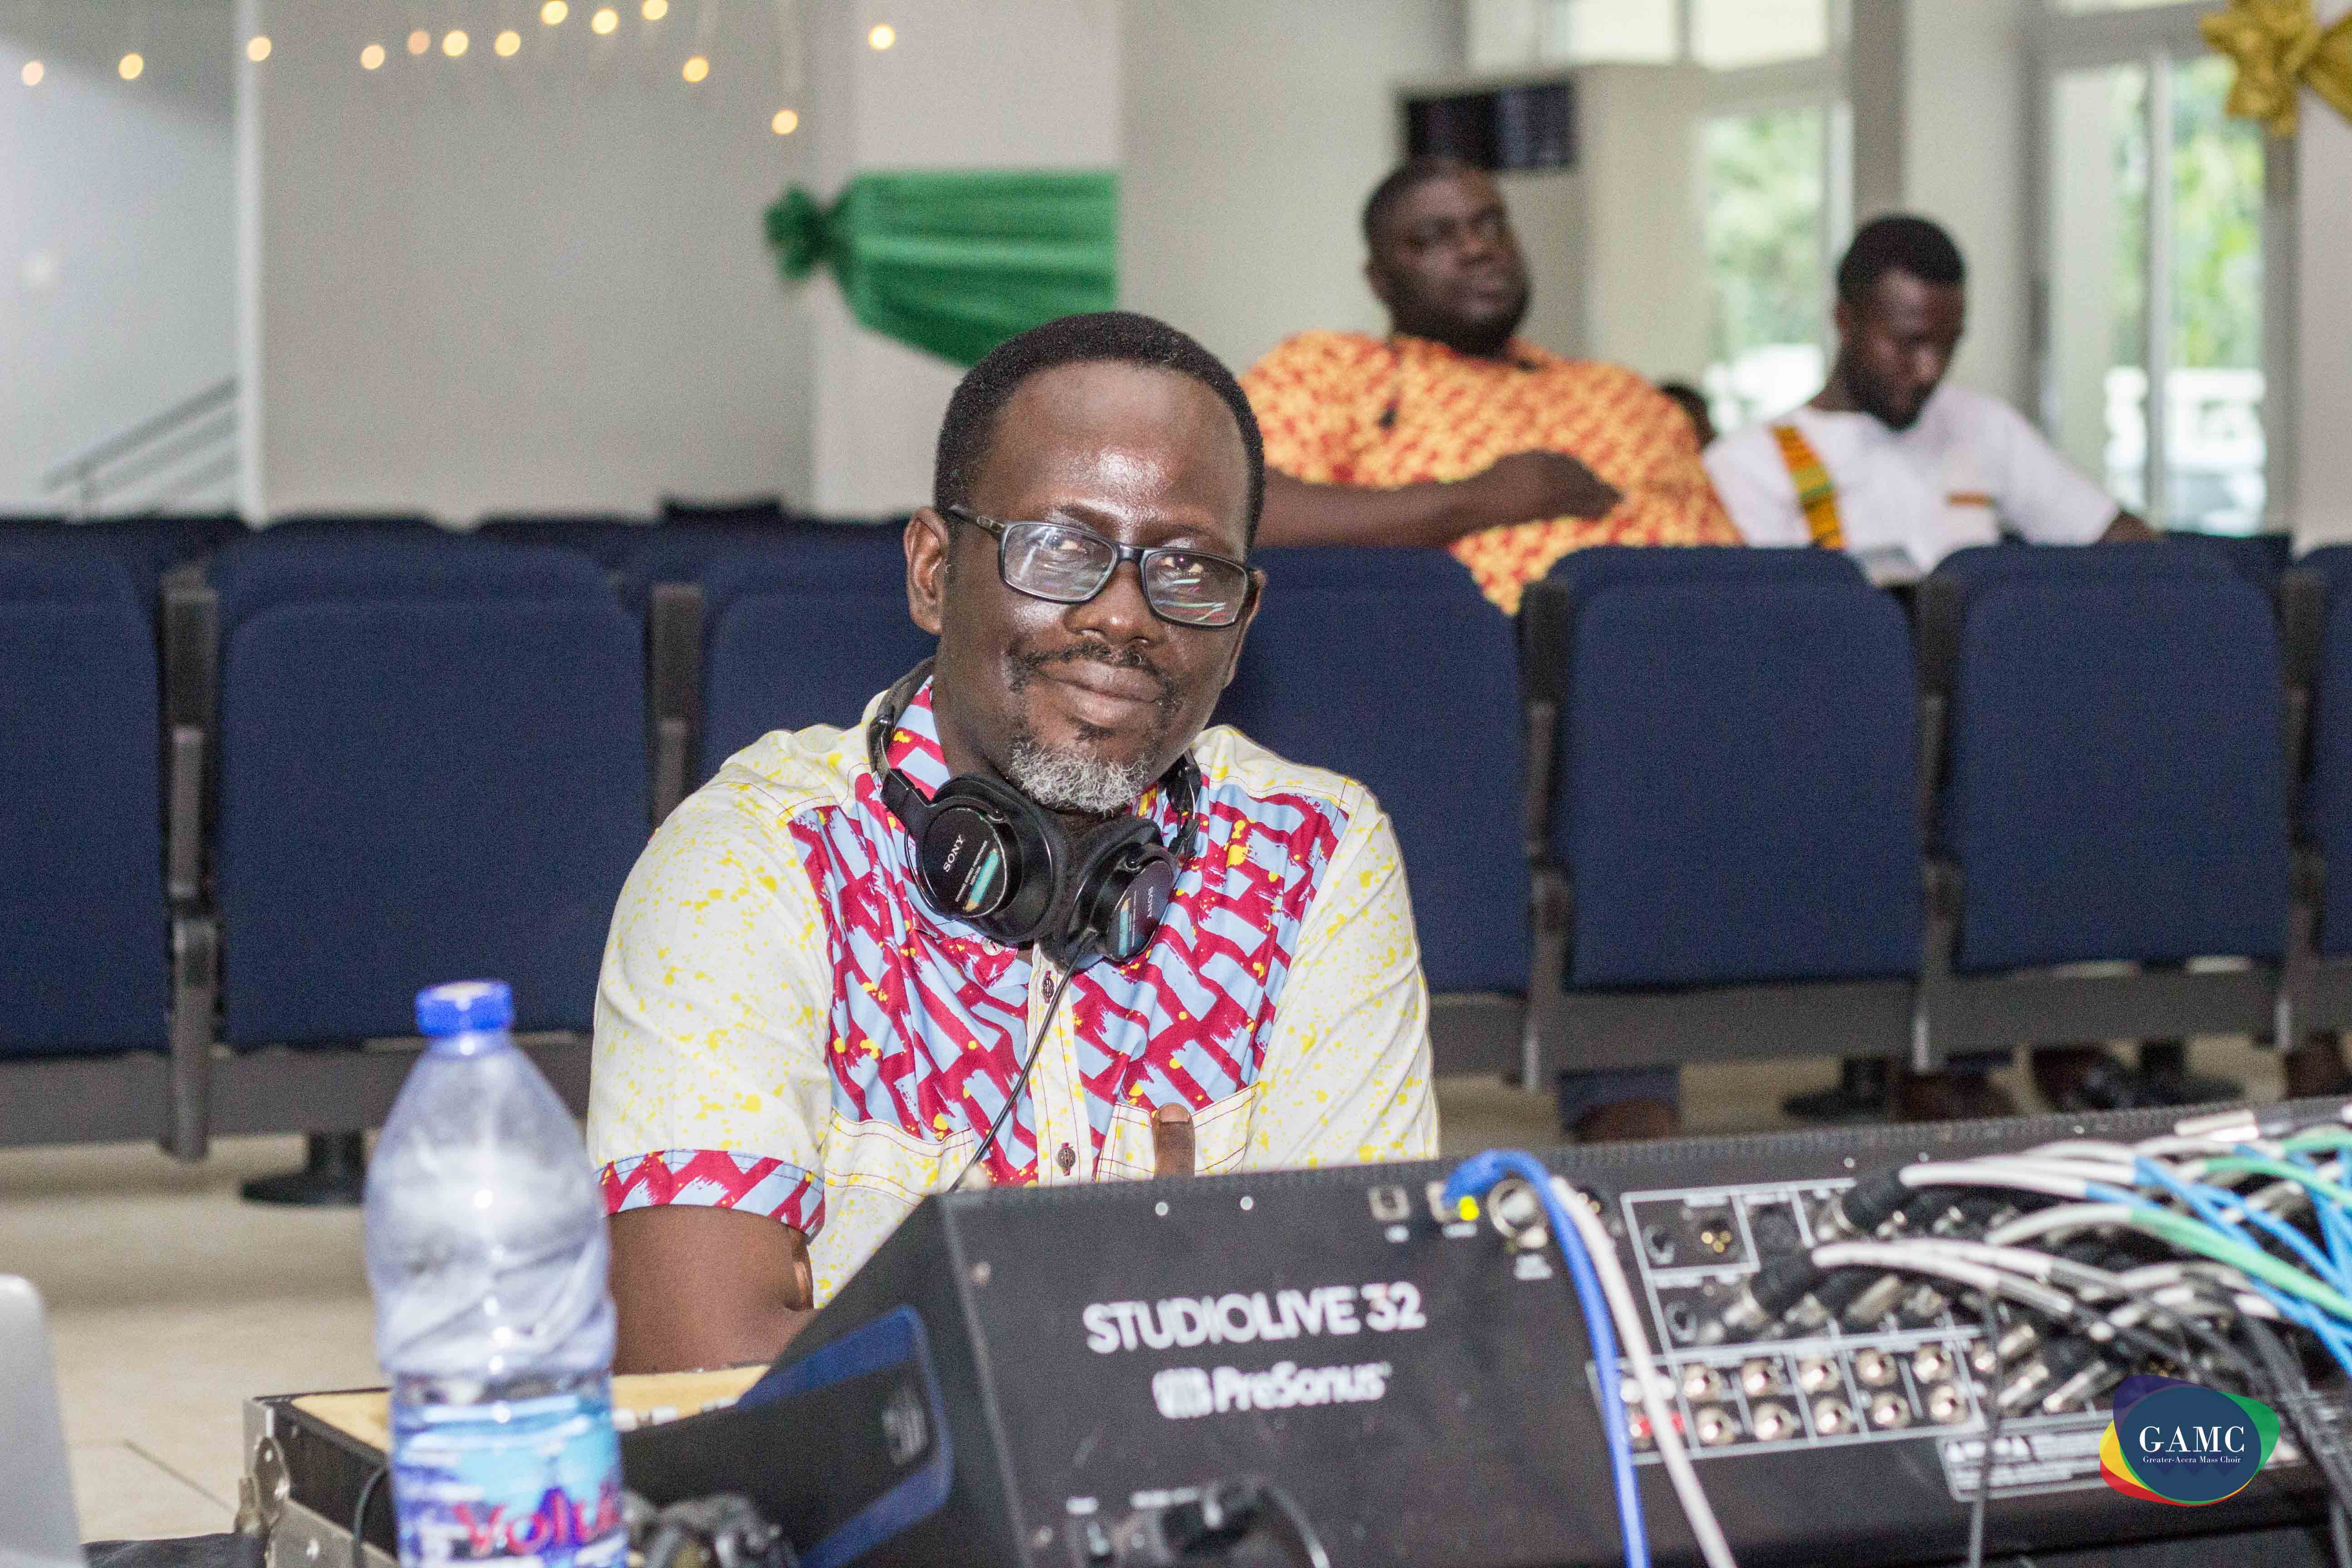 In Conversation with Dominic Ansah-Asare: Part 1 Kwaku Boakye-Frempong spoke with the founder and CEO of MIDO Productions, Dominic Ansah-Asare, about his journey and rise to dominance in sound engineering in Ghana.